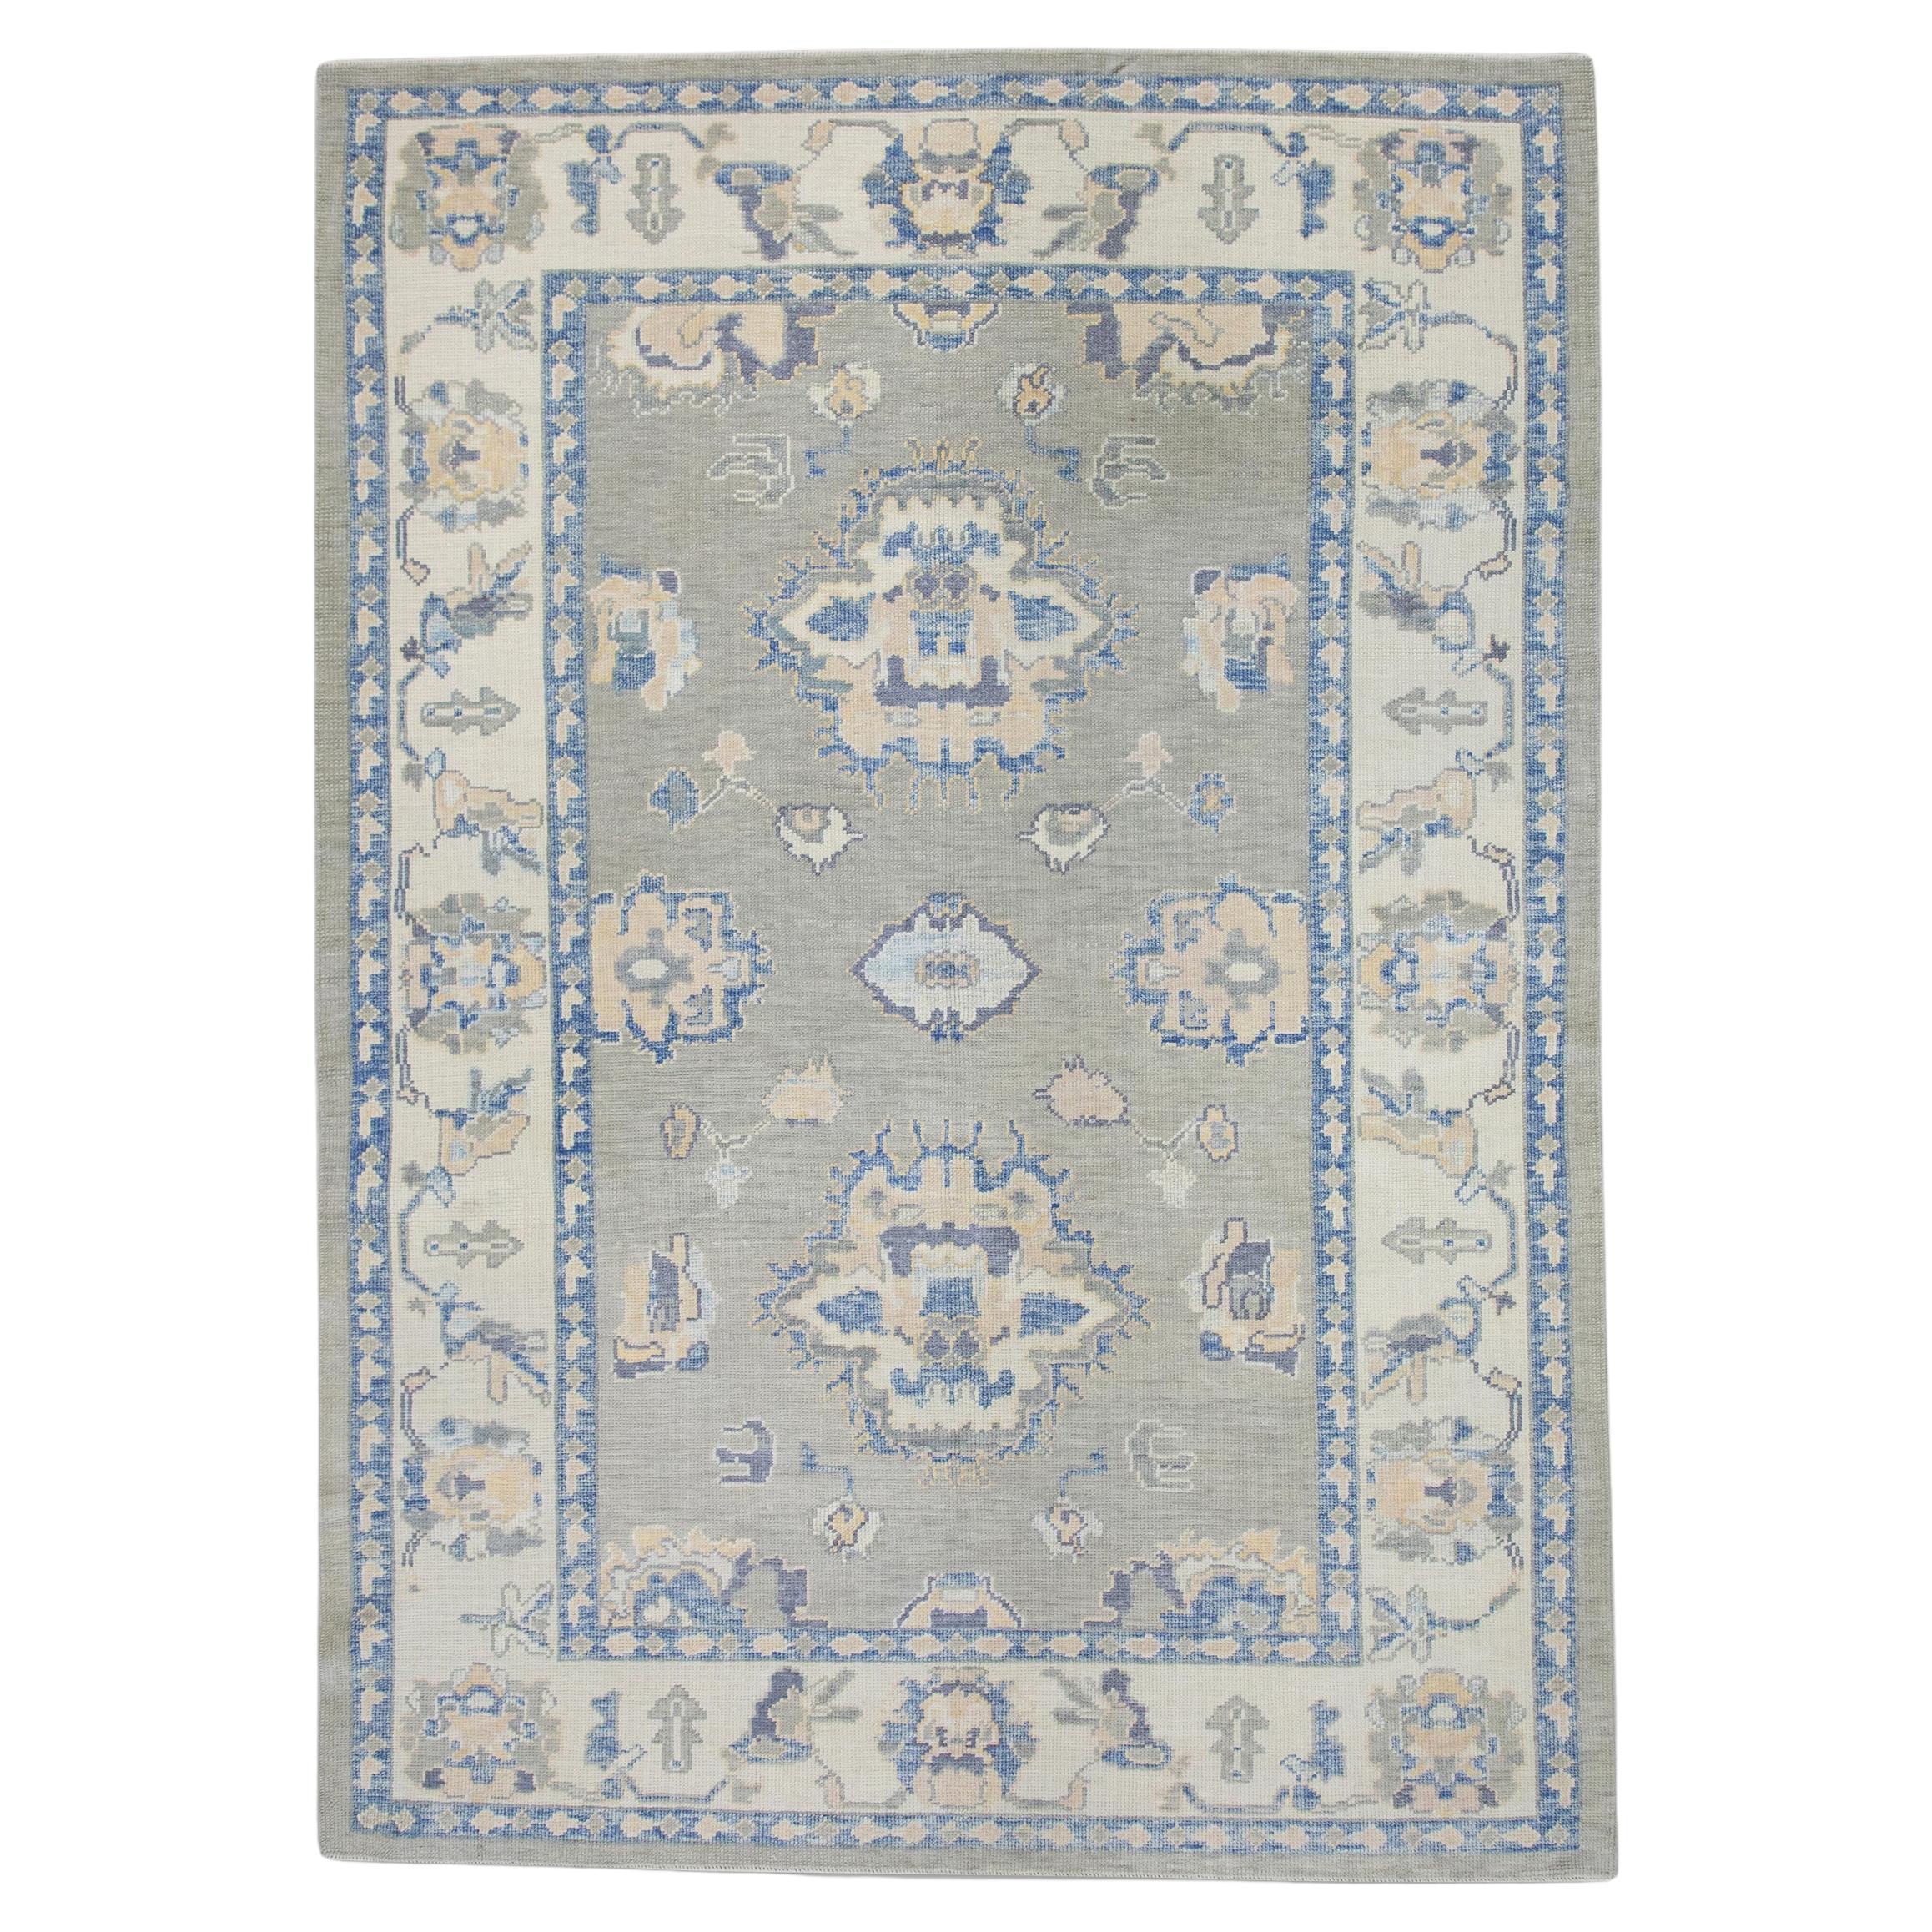 Green and Blue Floral Handwoven Wool Turkish Oushak Rug 6' x 8'4" For Sale